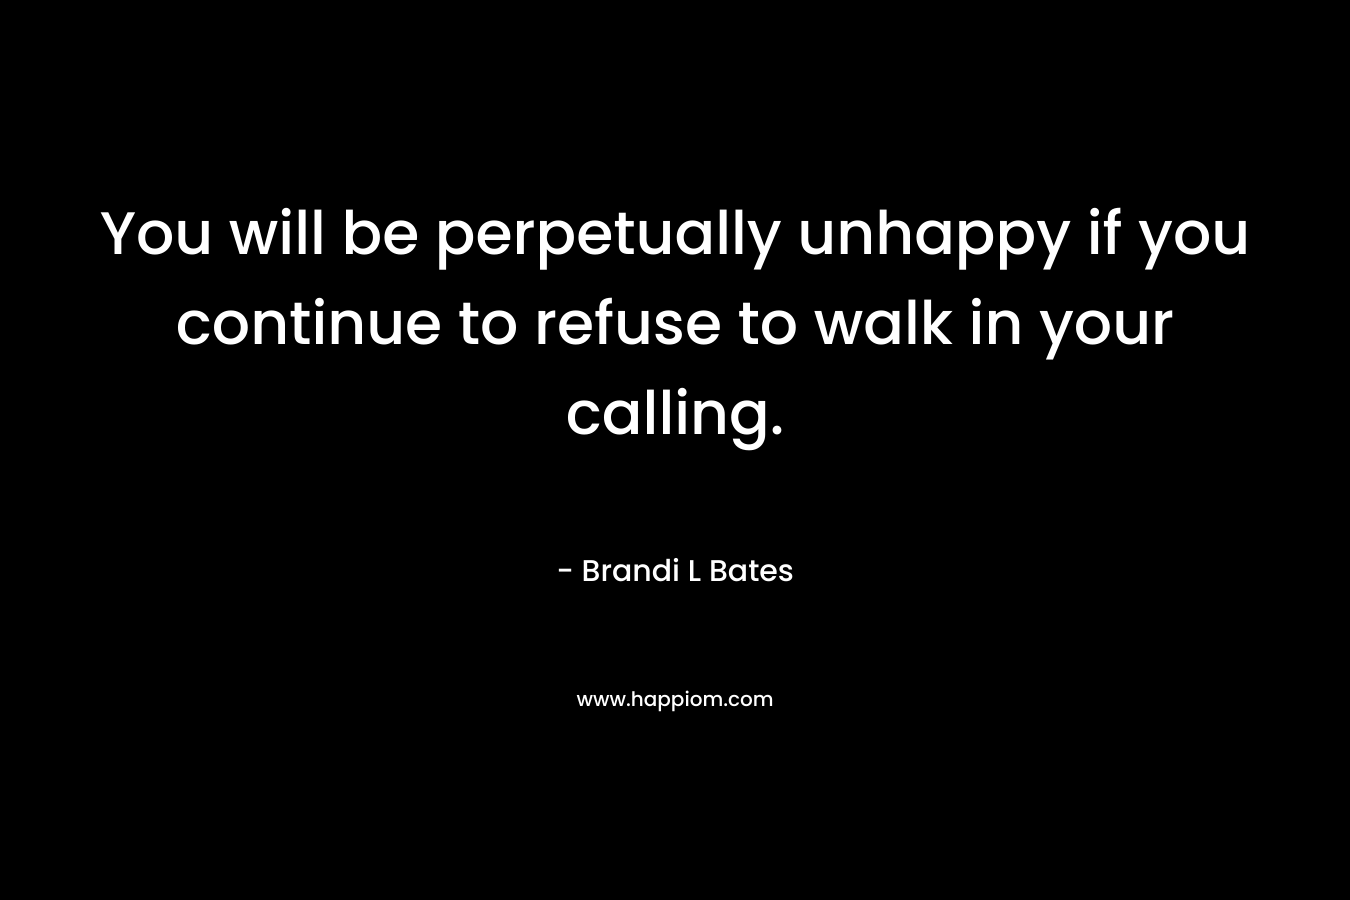 You will be perpetually unhappy if you continue to refuse to walk in your calling. – Brandi L Bates